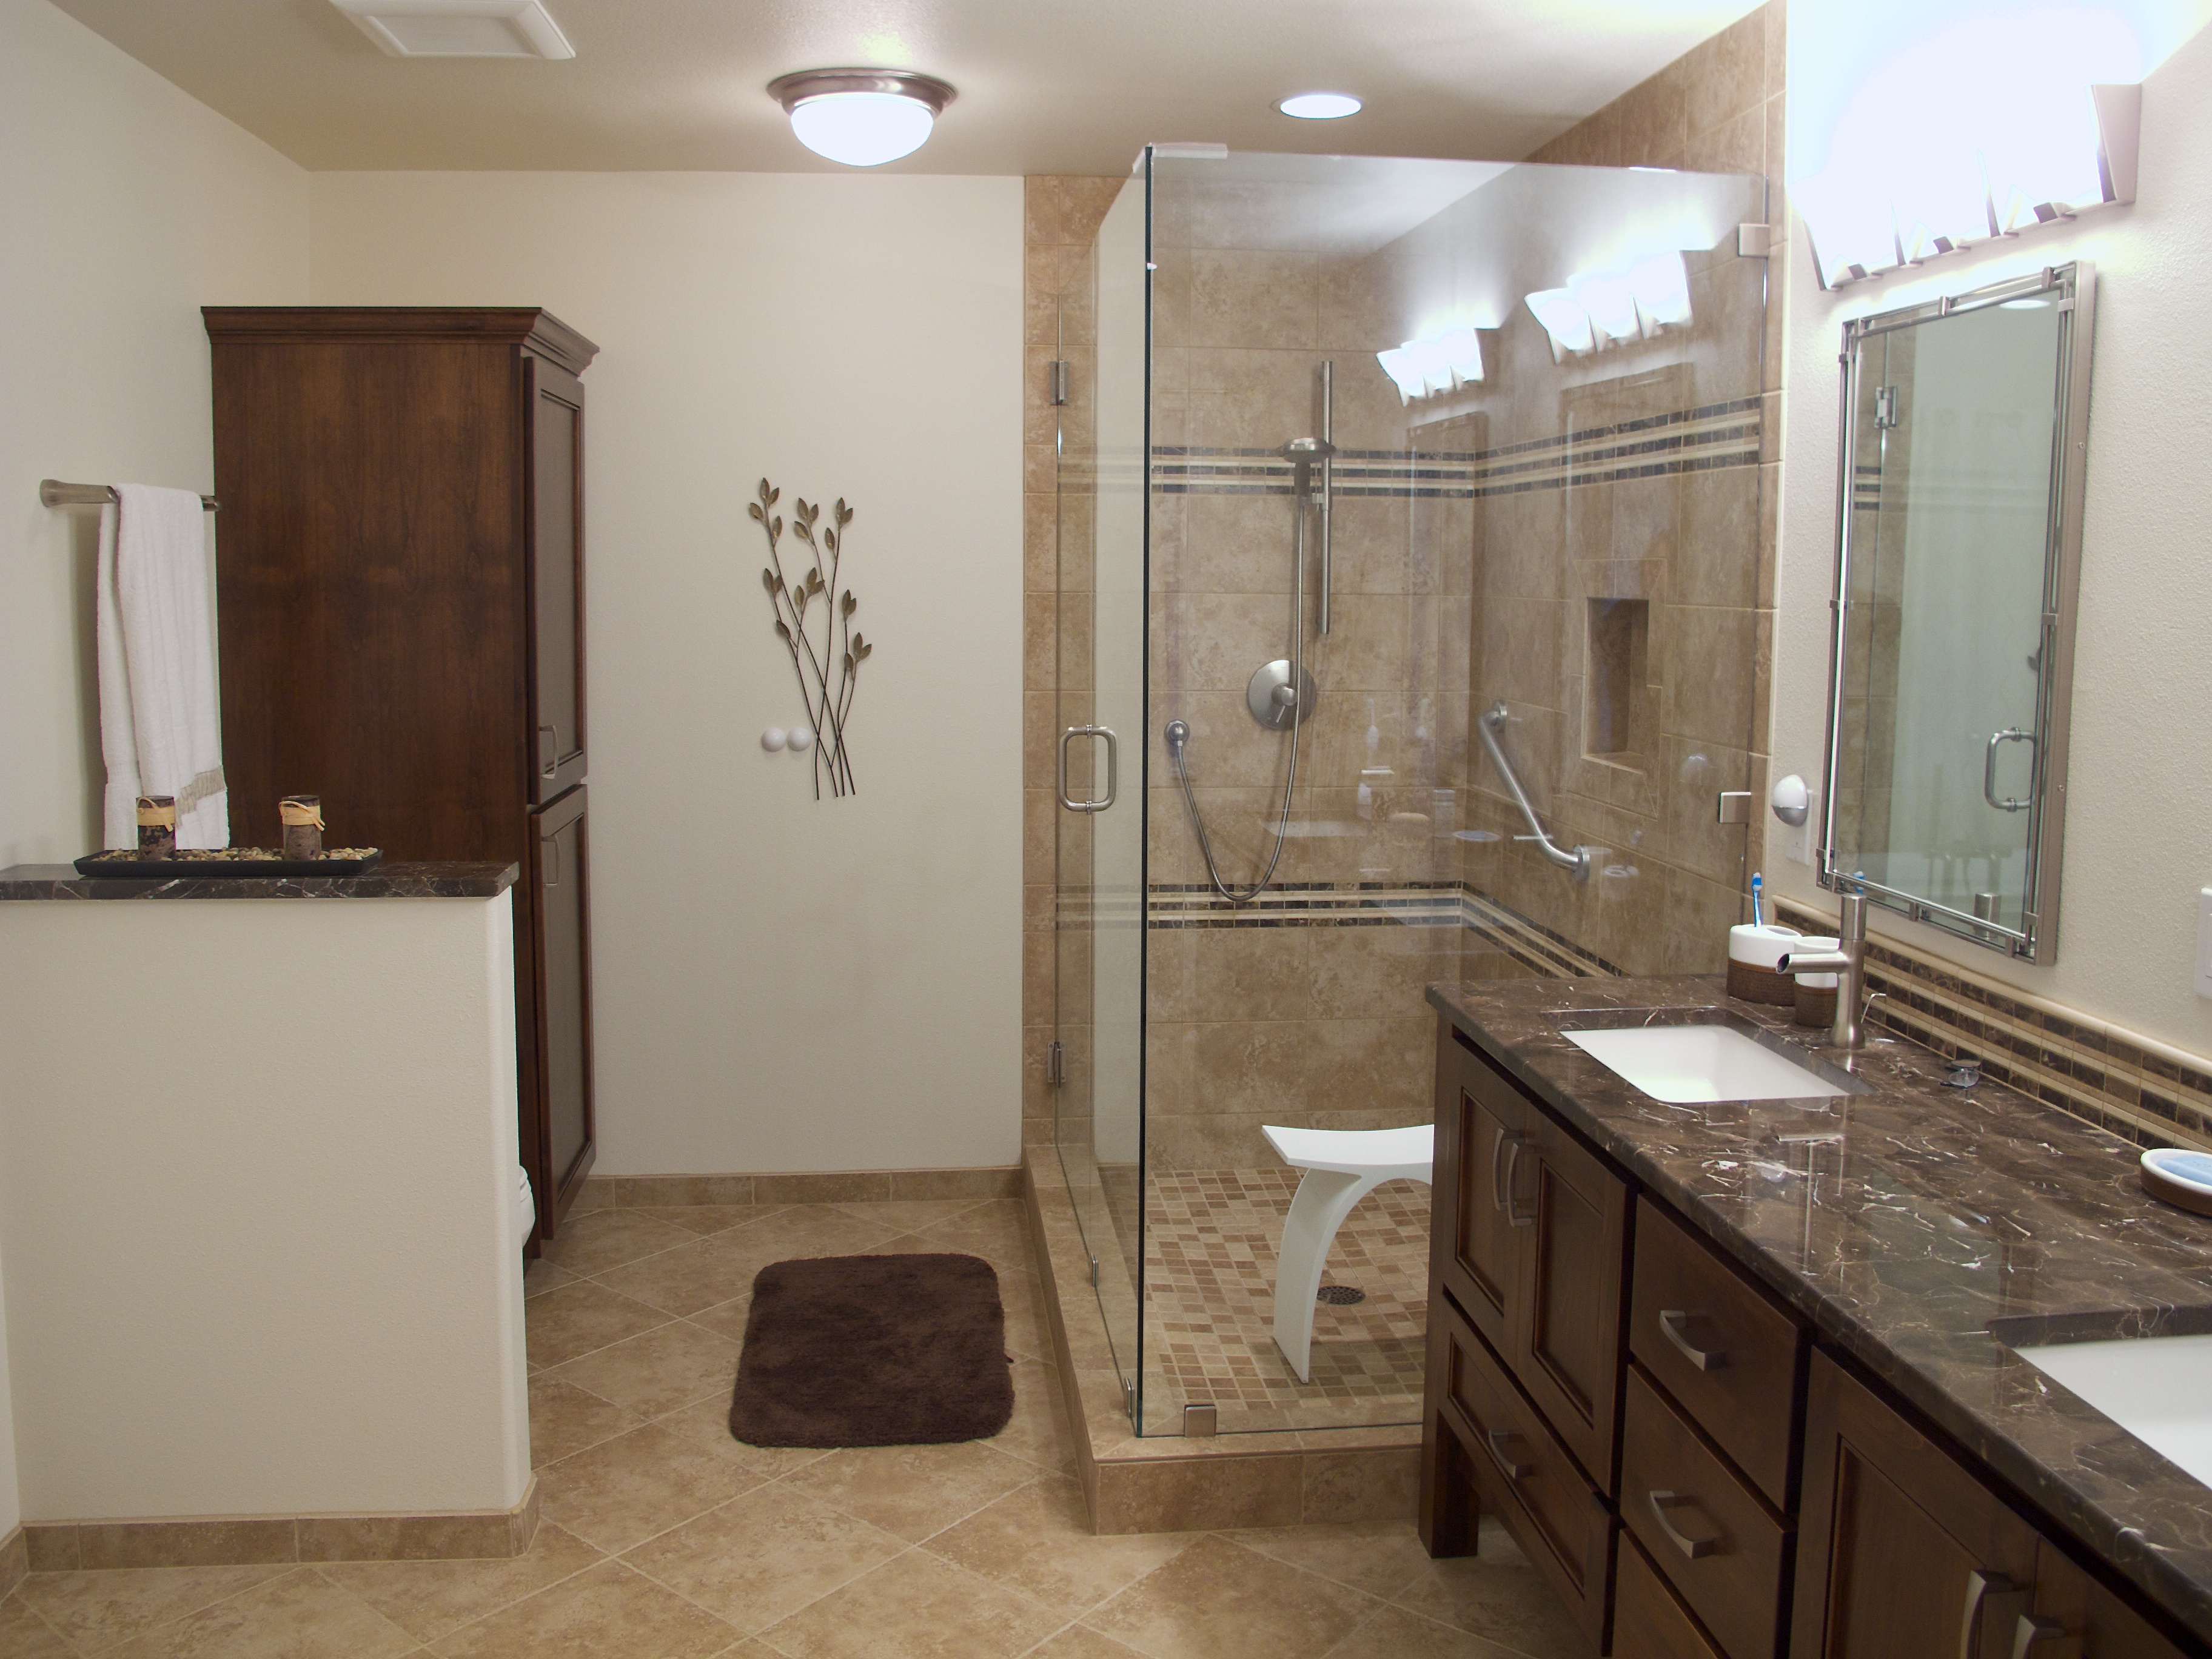 Bathroom Remodel with Glass Shower Stall